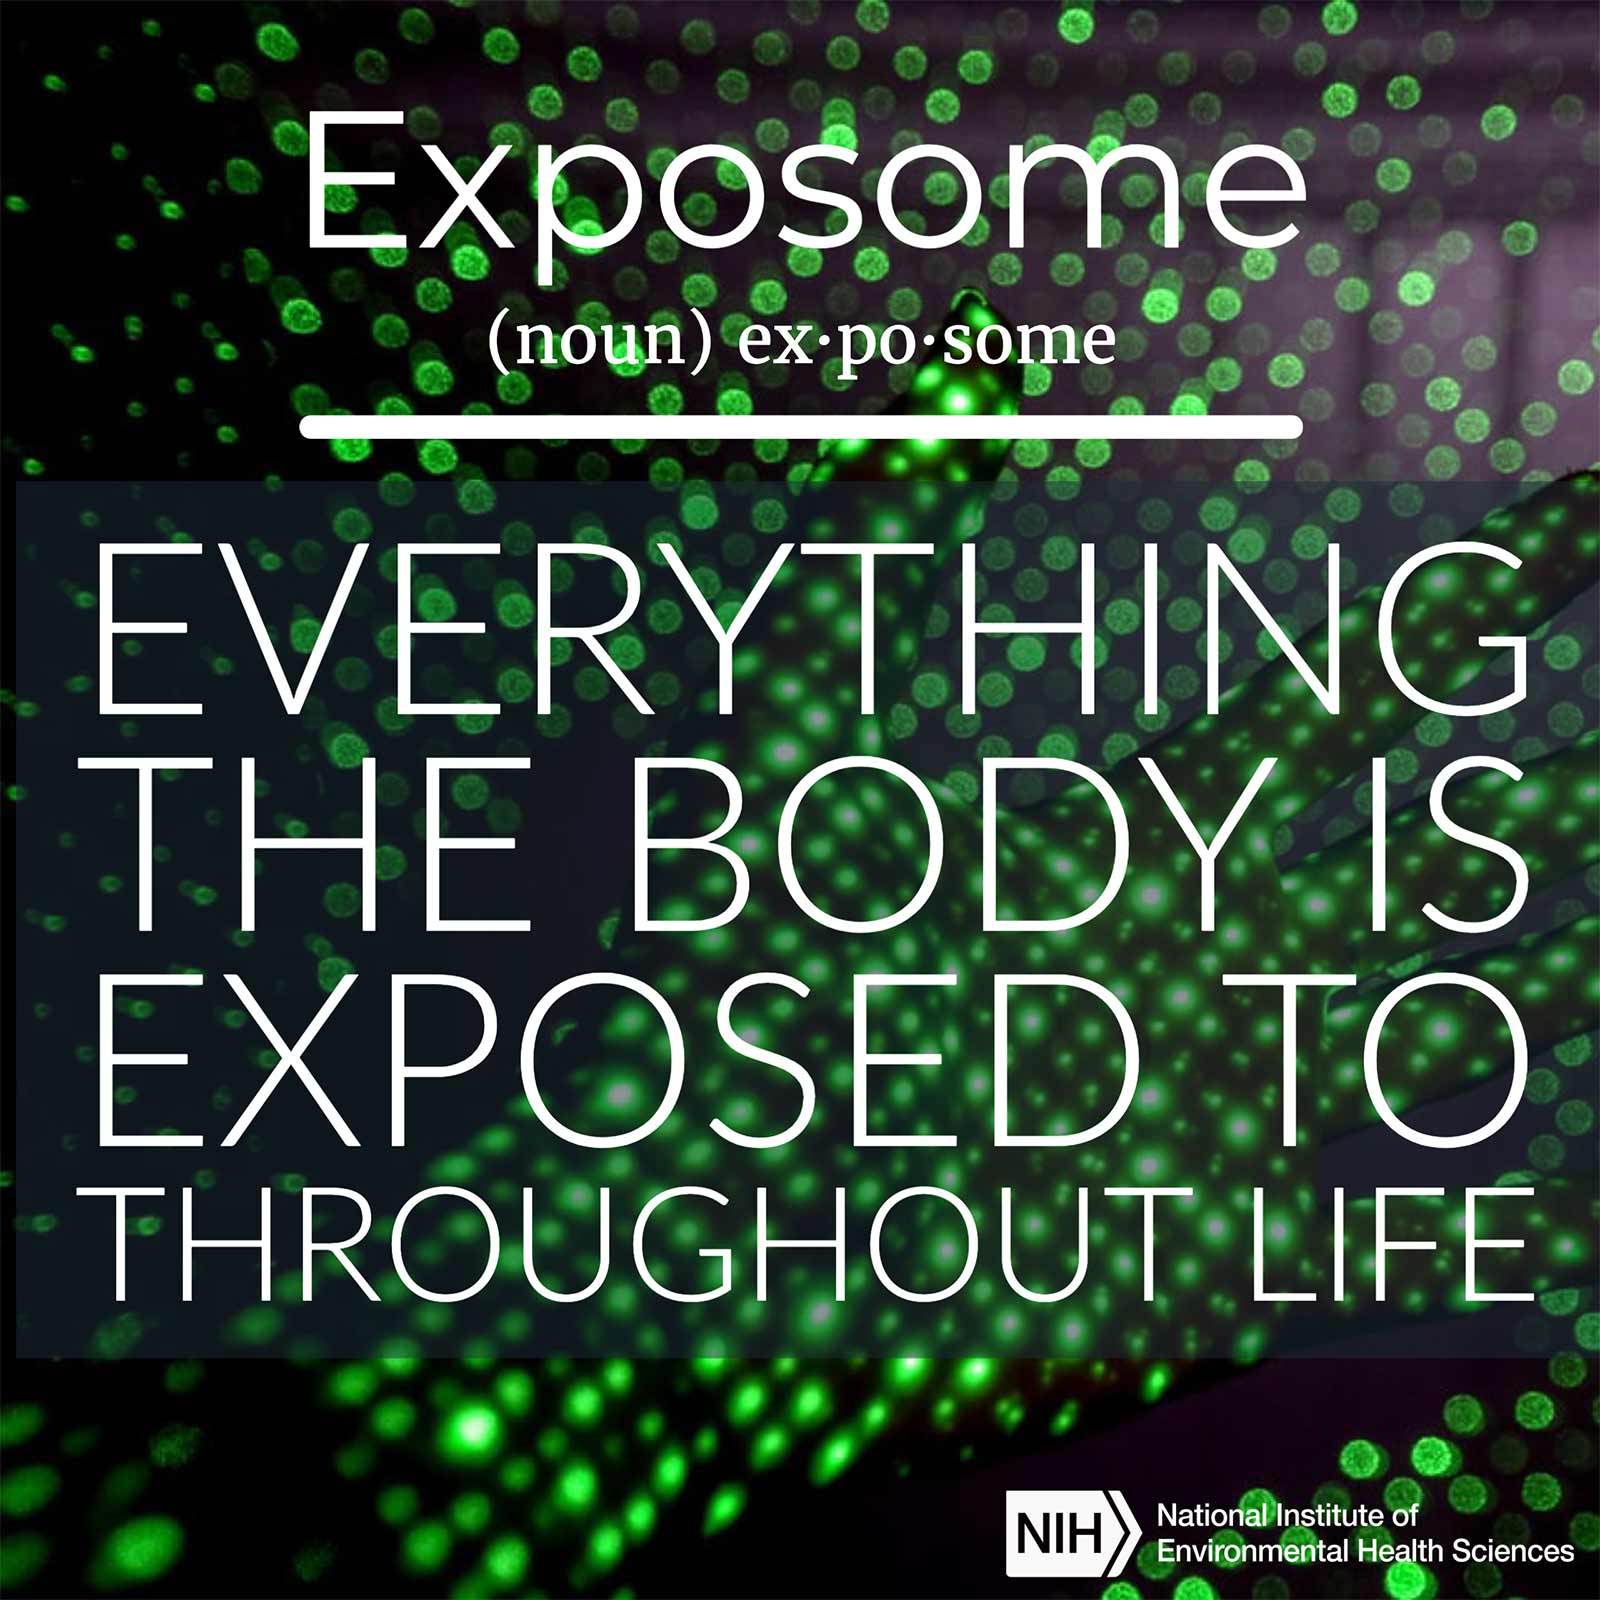 Exposome (noun) defined as 'everything the body is exposed to throughout life.'